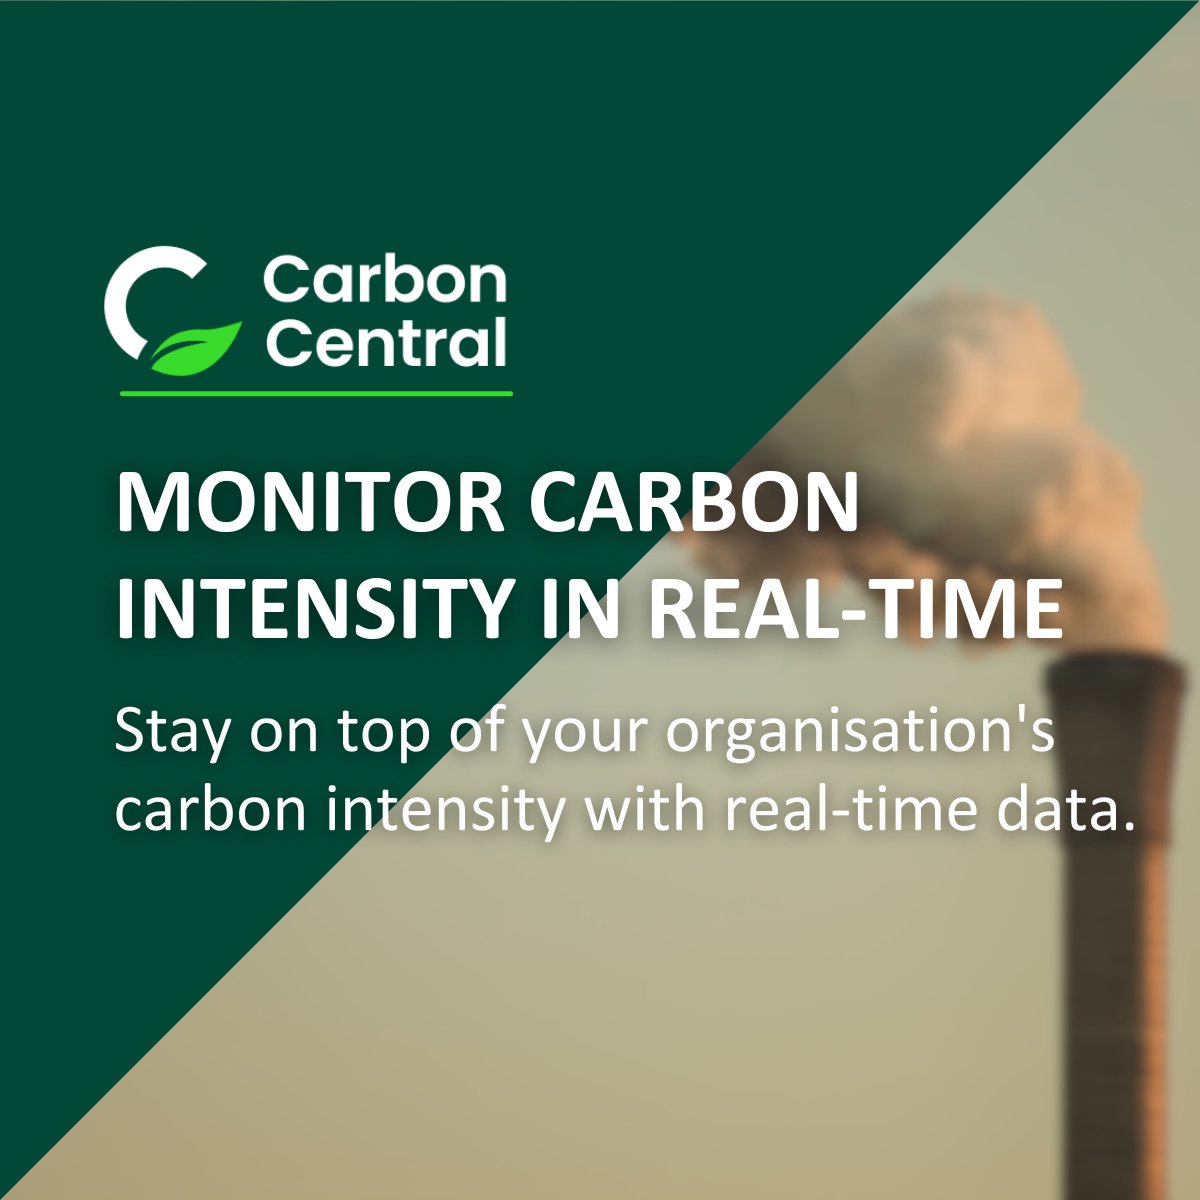 Optimise your operations by monitoring your #CarbonIntensity with #CarbonCentral: tymlez.com/contact #GreenResources #SustainabilityGoals #RenewableEnergy 
#EnergyTransition #NetZero  #ClimateResilience #CarbonReporting #TYMLEZ #ClimateAction #GreenTech  #Innovation $NVQ